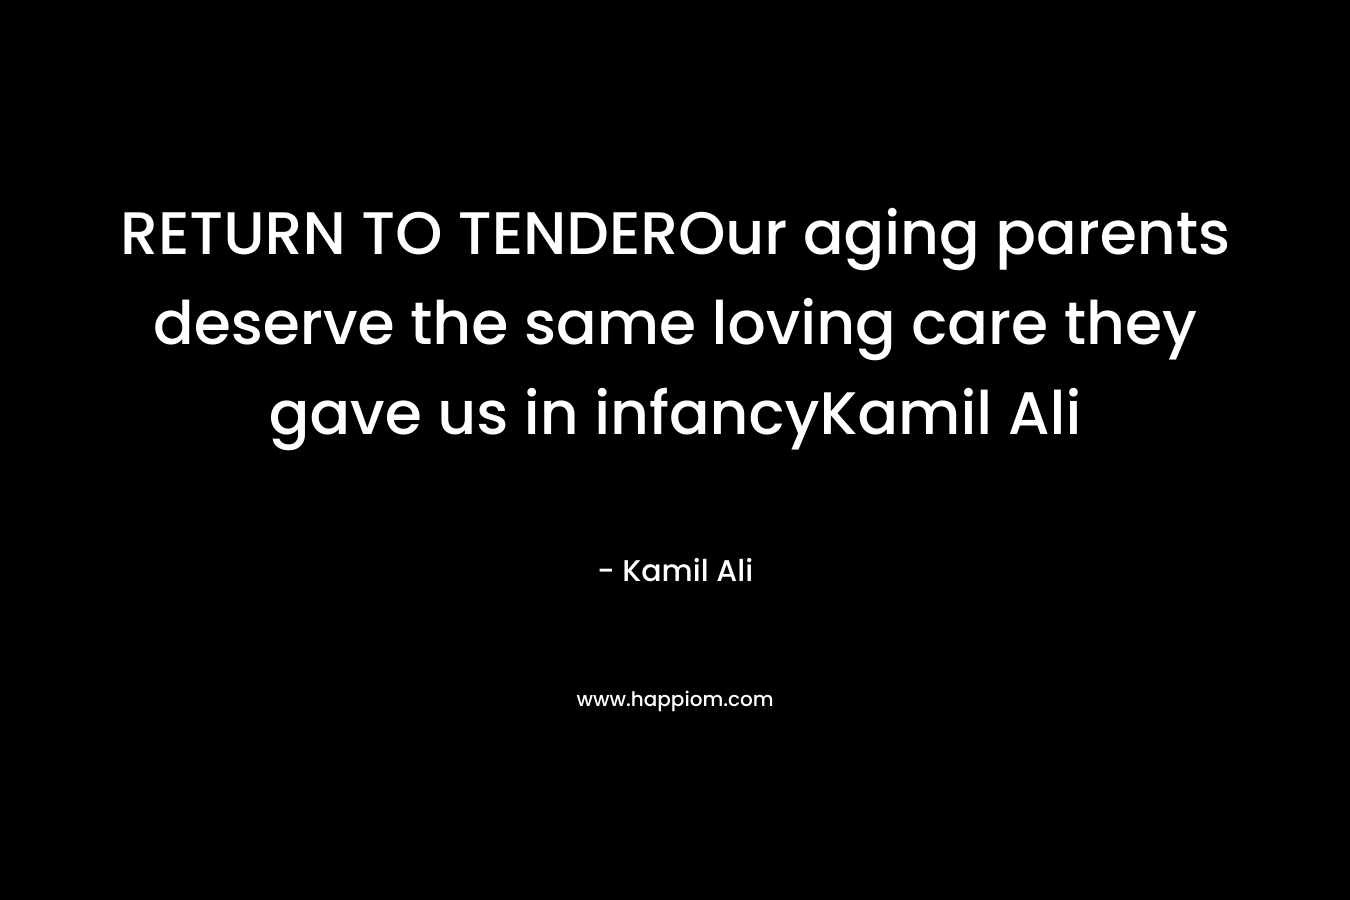 RETURN TO TENDEROur aging parents deserve the same loving care they gave us in infancyKamil Ali – Kamil Ali